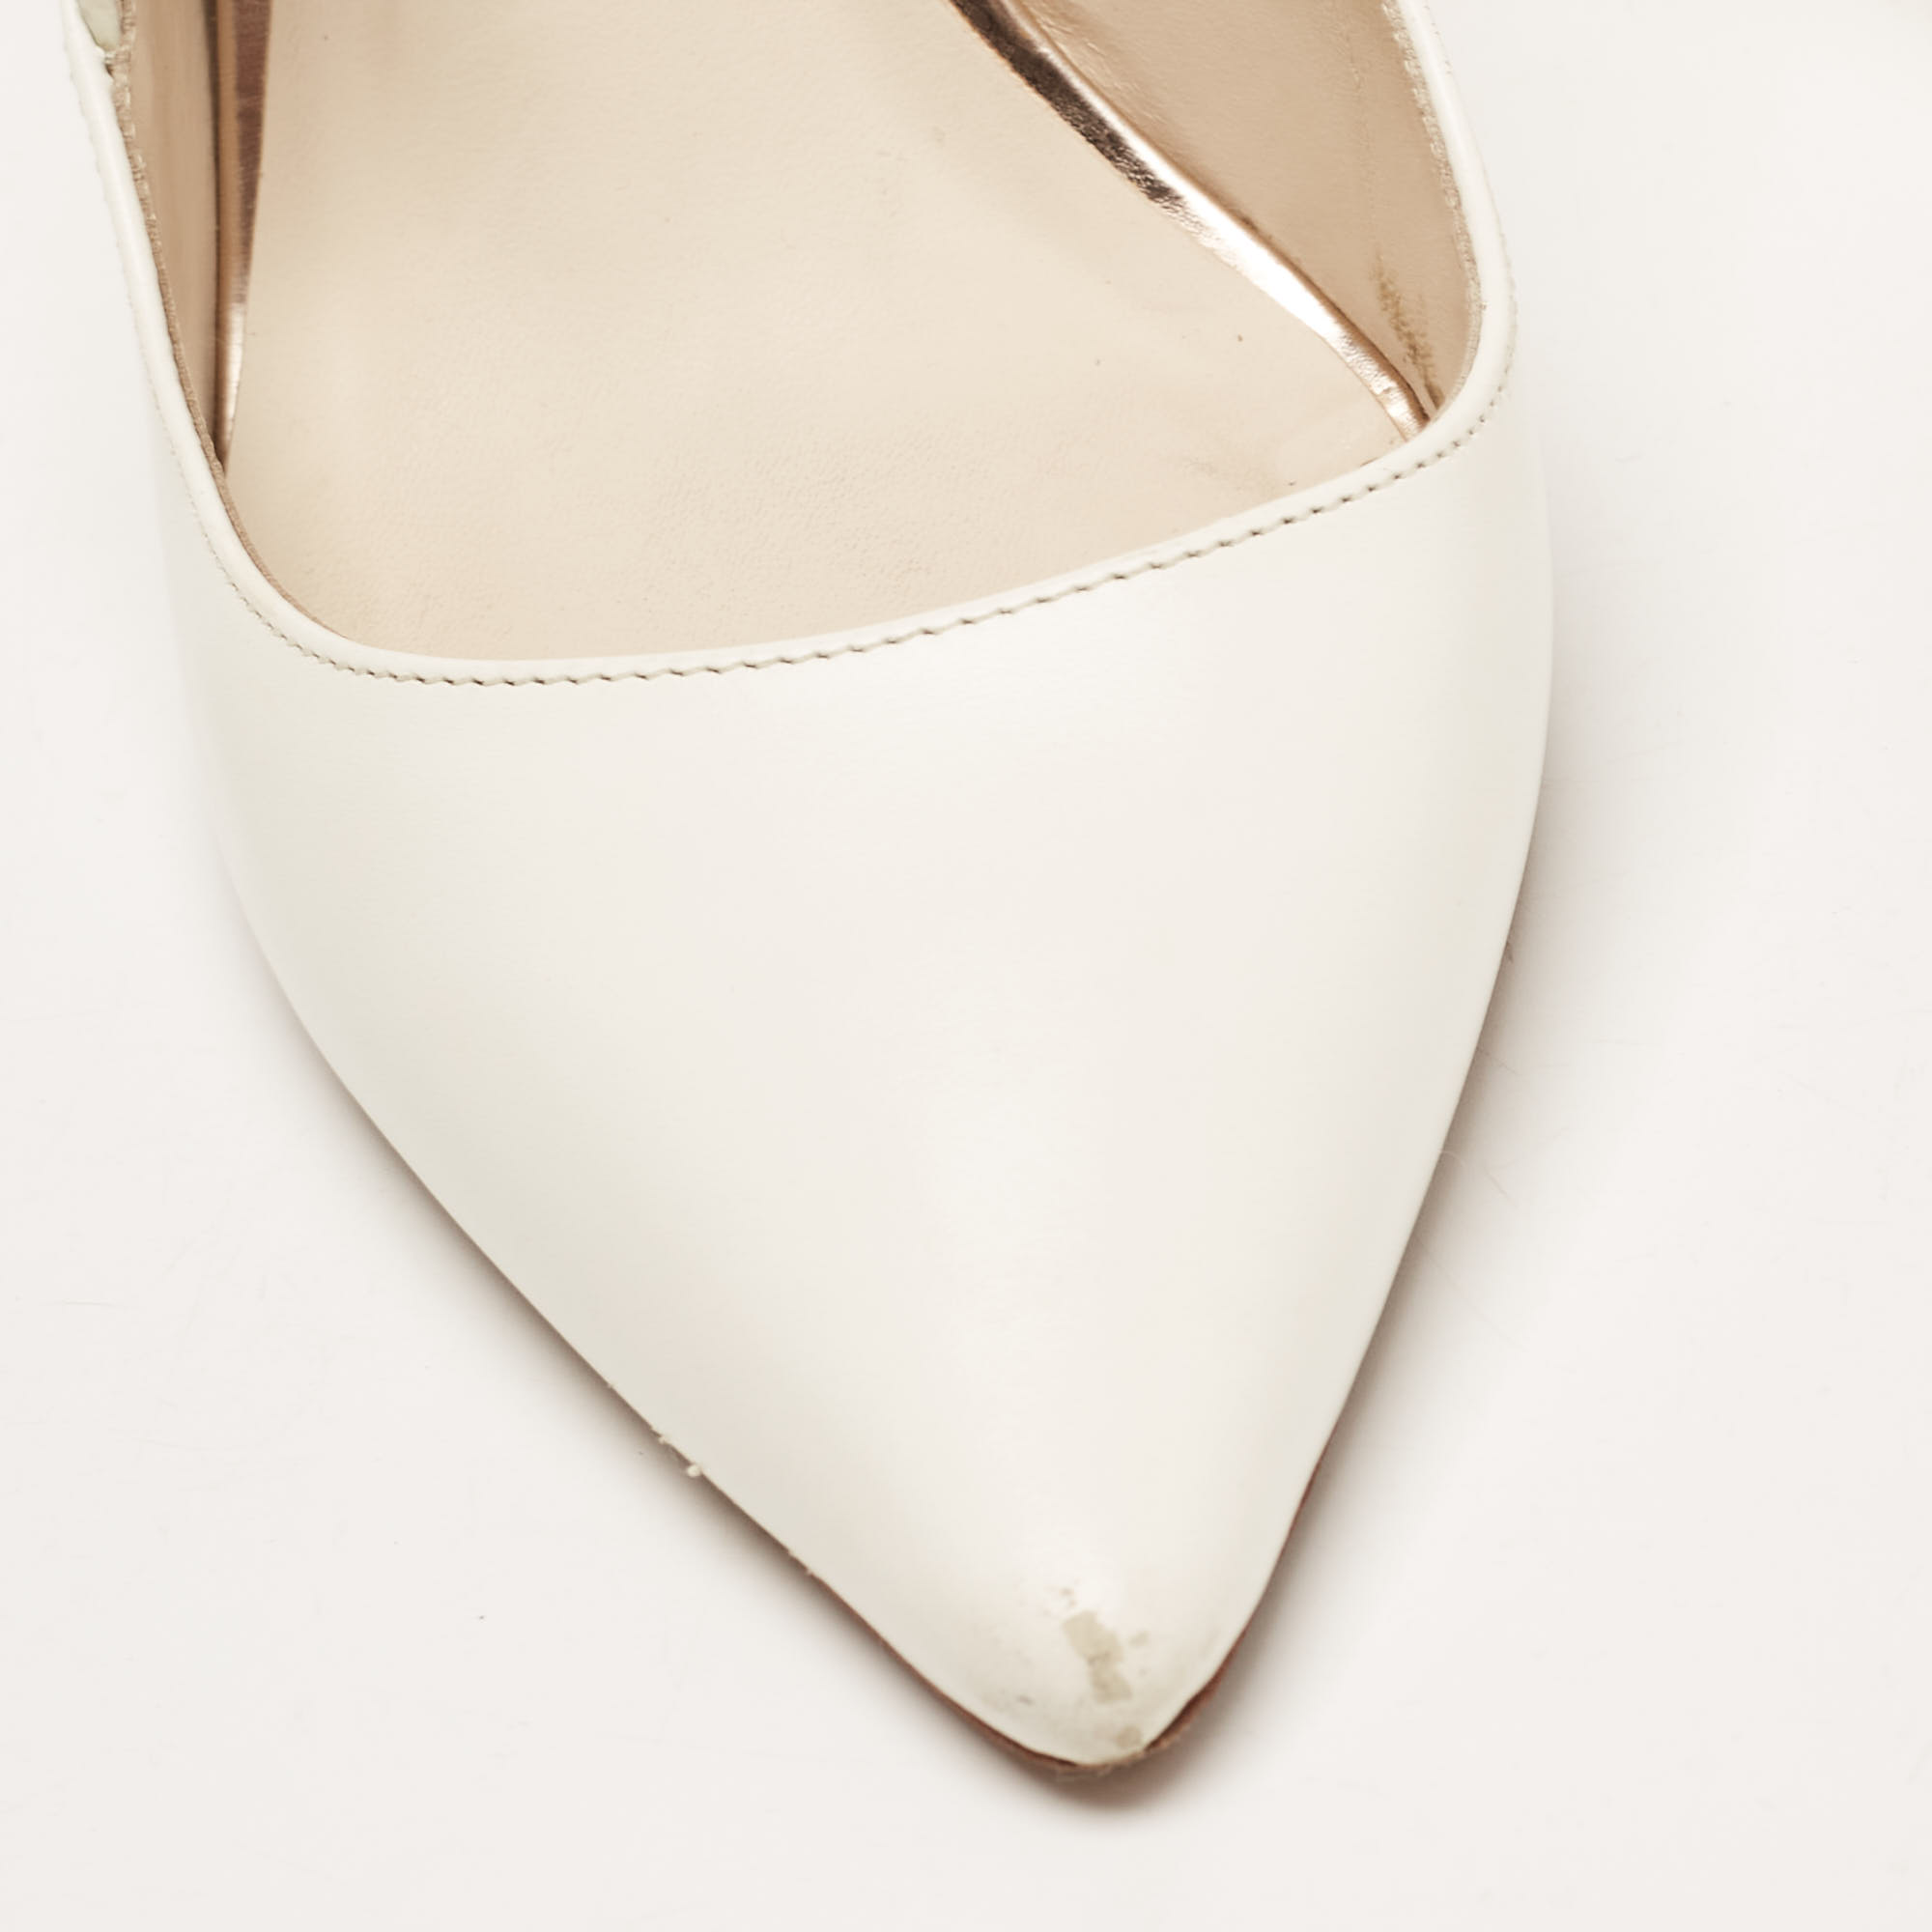 Sophia Webster White Leather Angelo Pointed Toe Slingback Pumps Size 36